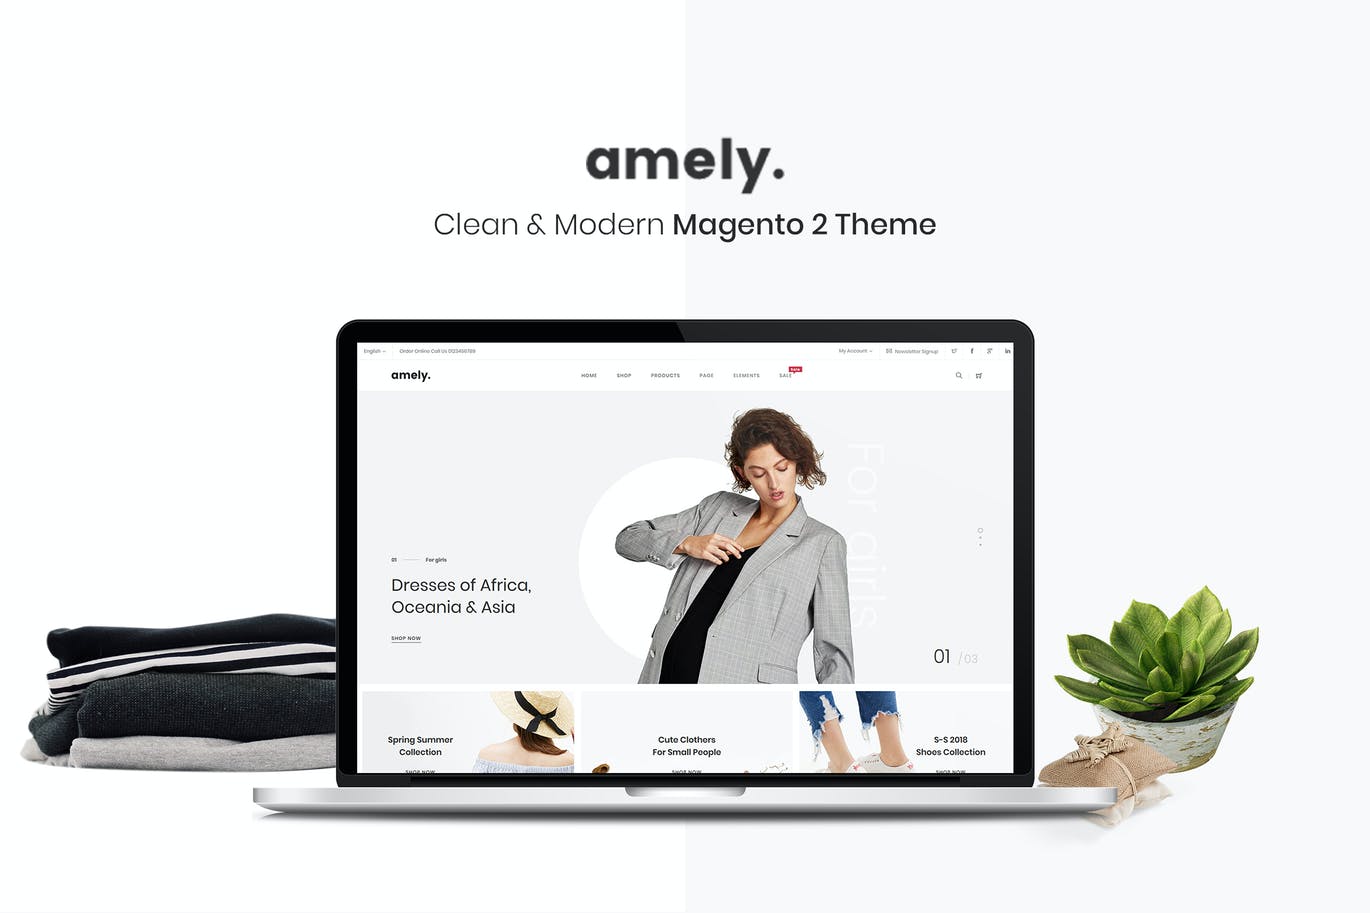 Amely - Clean & Modern Magento 2 Theme